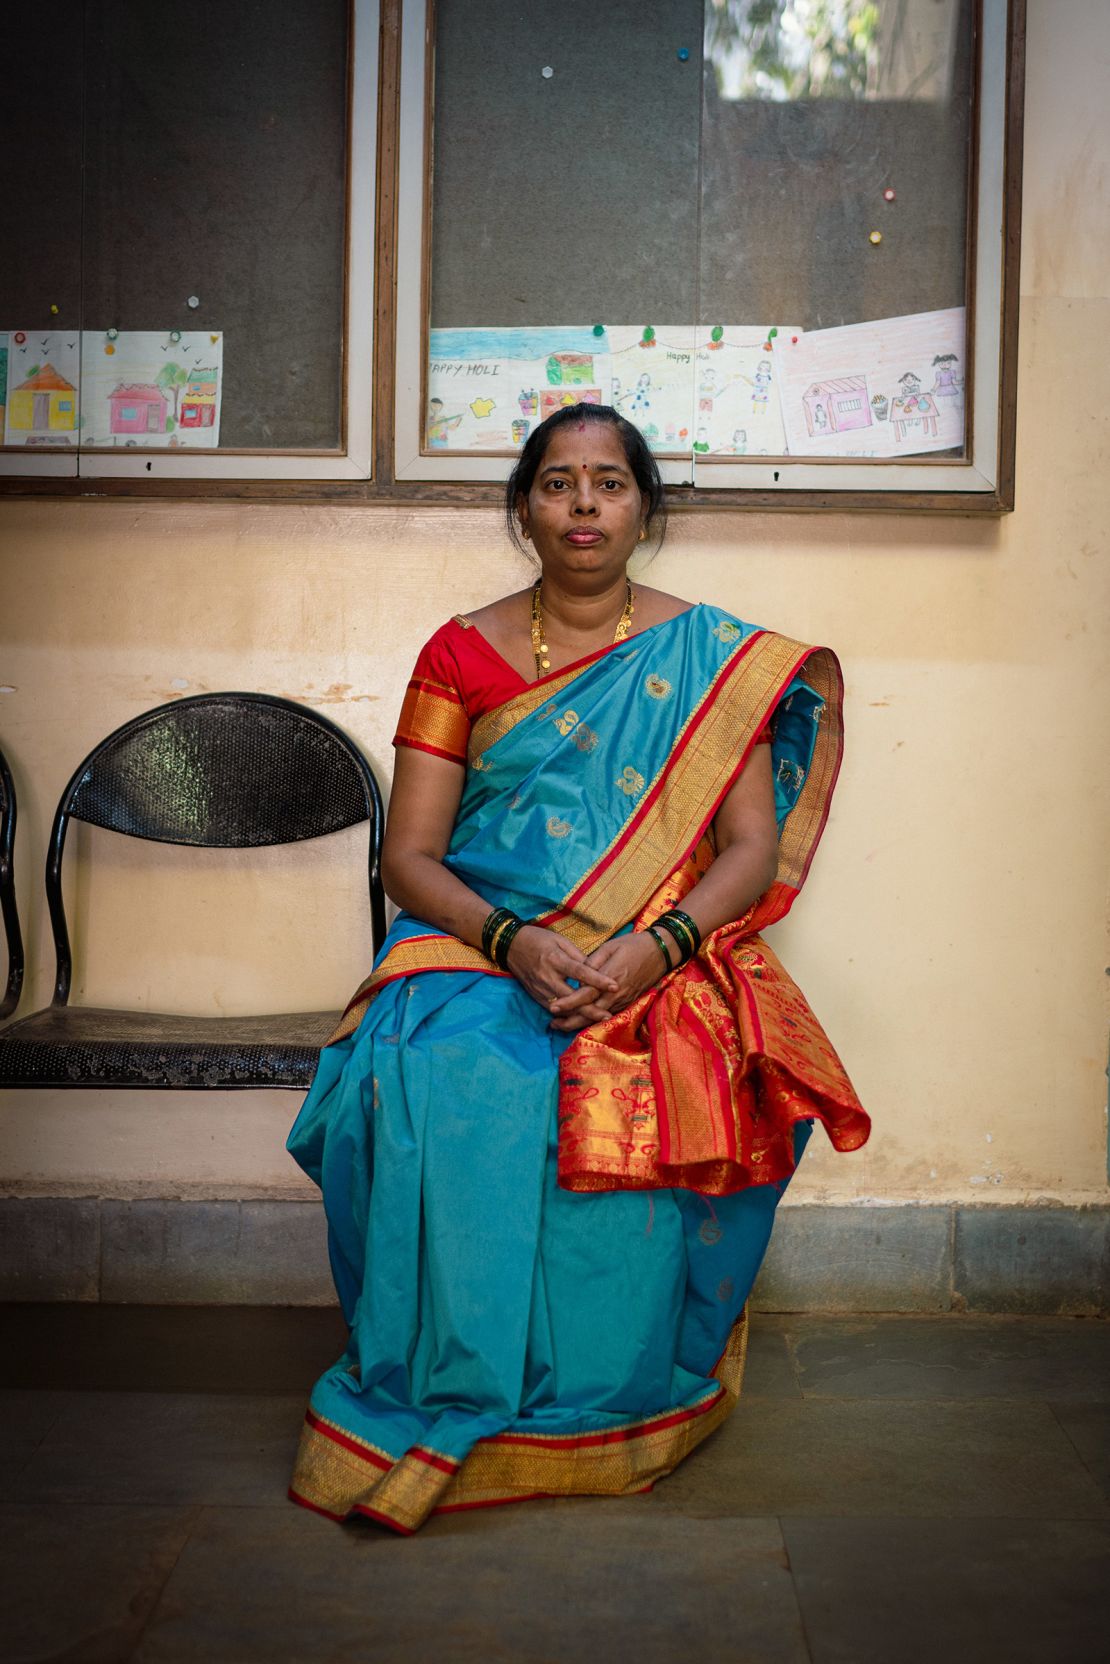 Neeta Jadhav, 46, poses for a picture during an interview with CNN at Manohar Joshi College in Dharavi on April 14.